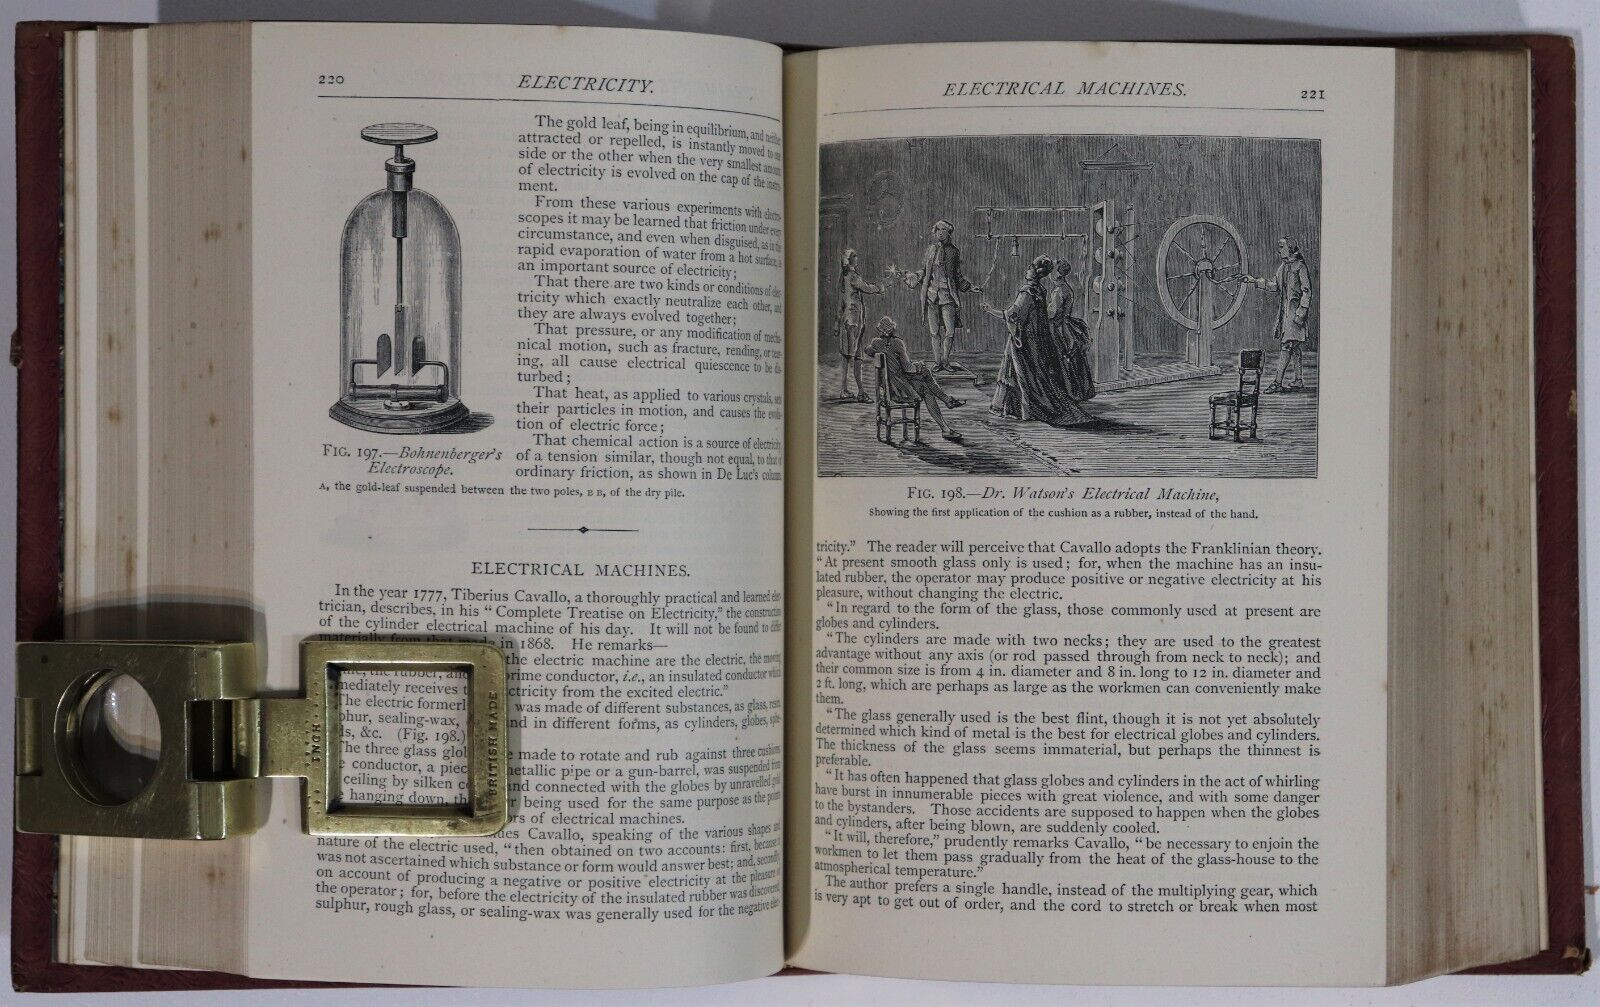 Cyclopaedic Science Simplified by J.H. Pepper - c1877 - Antique Science Book